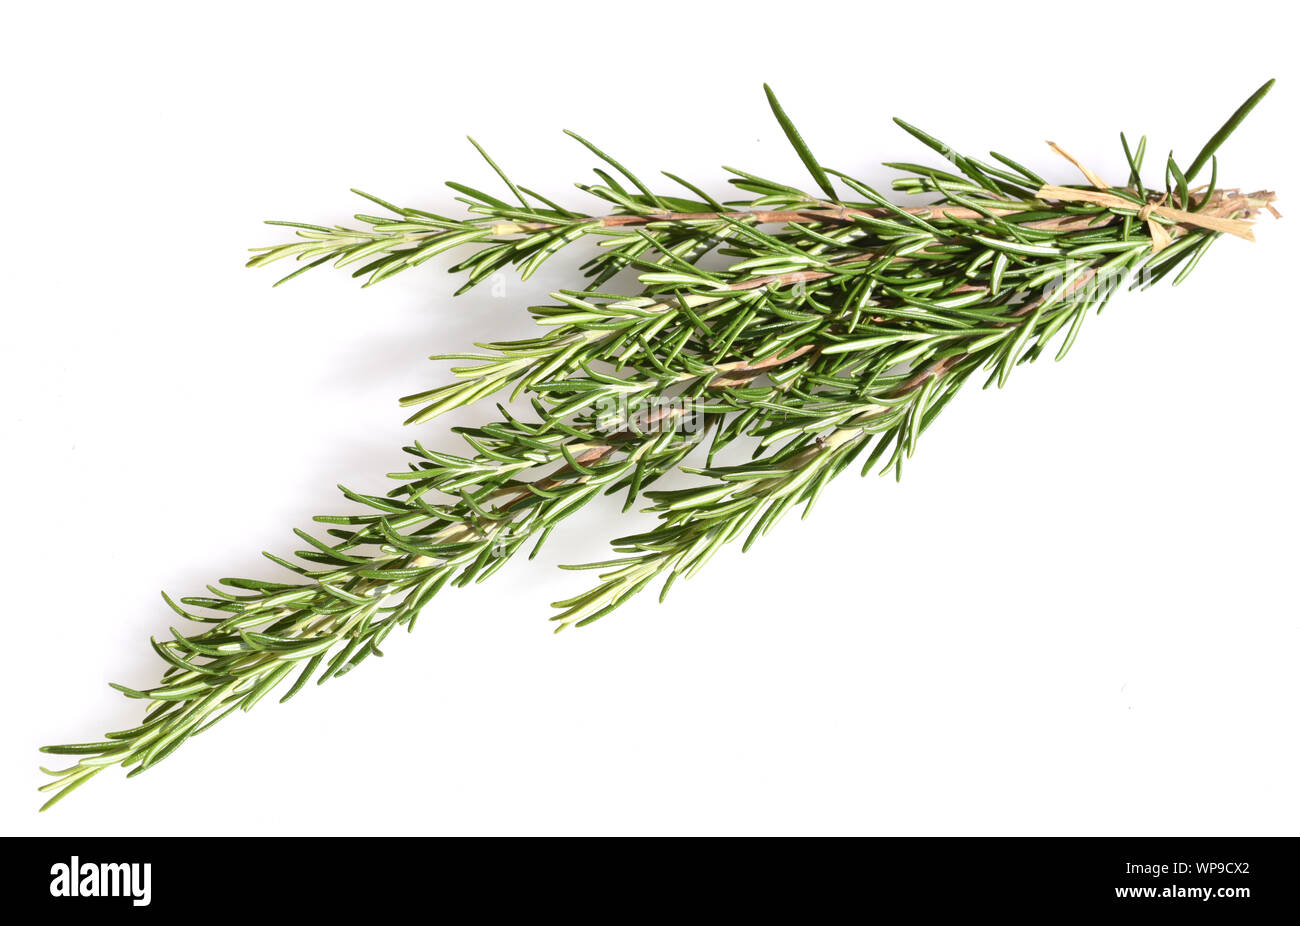 Rosmarin, Rosemary officinalis, ist eine Heil- und Kraeuterpflanze. Rosemary officinalis, is a medicinal and herbal plant. Stock Photo